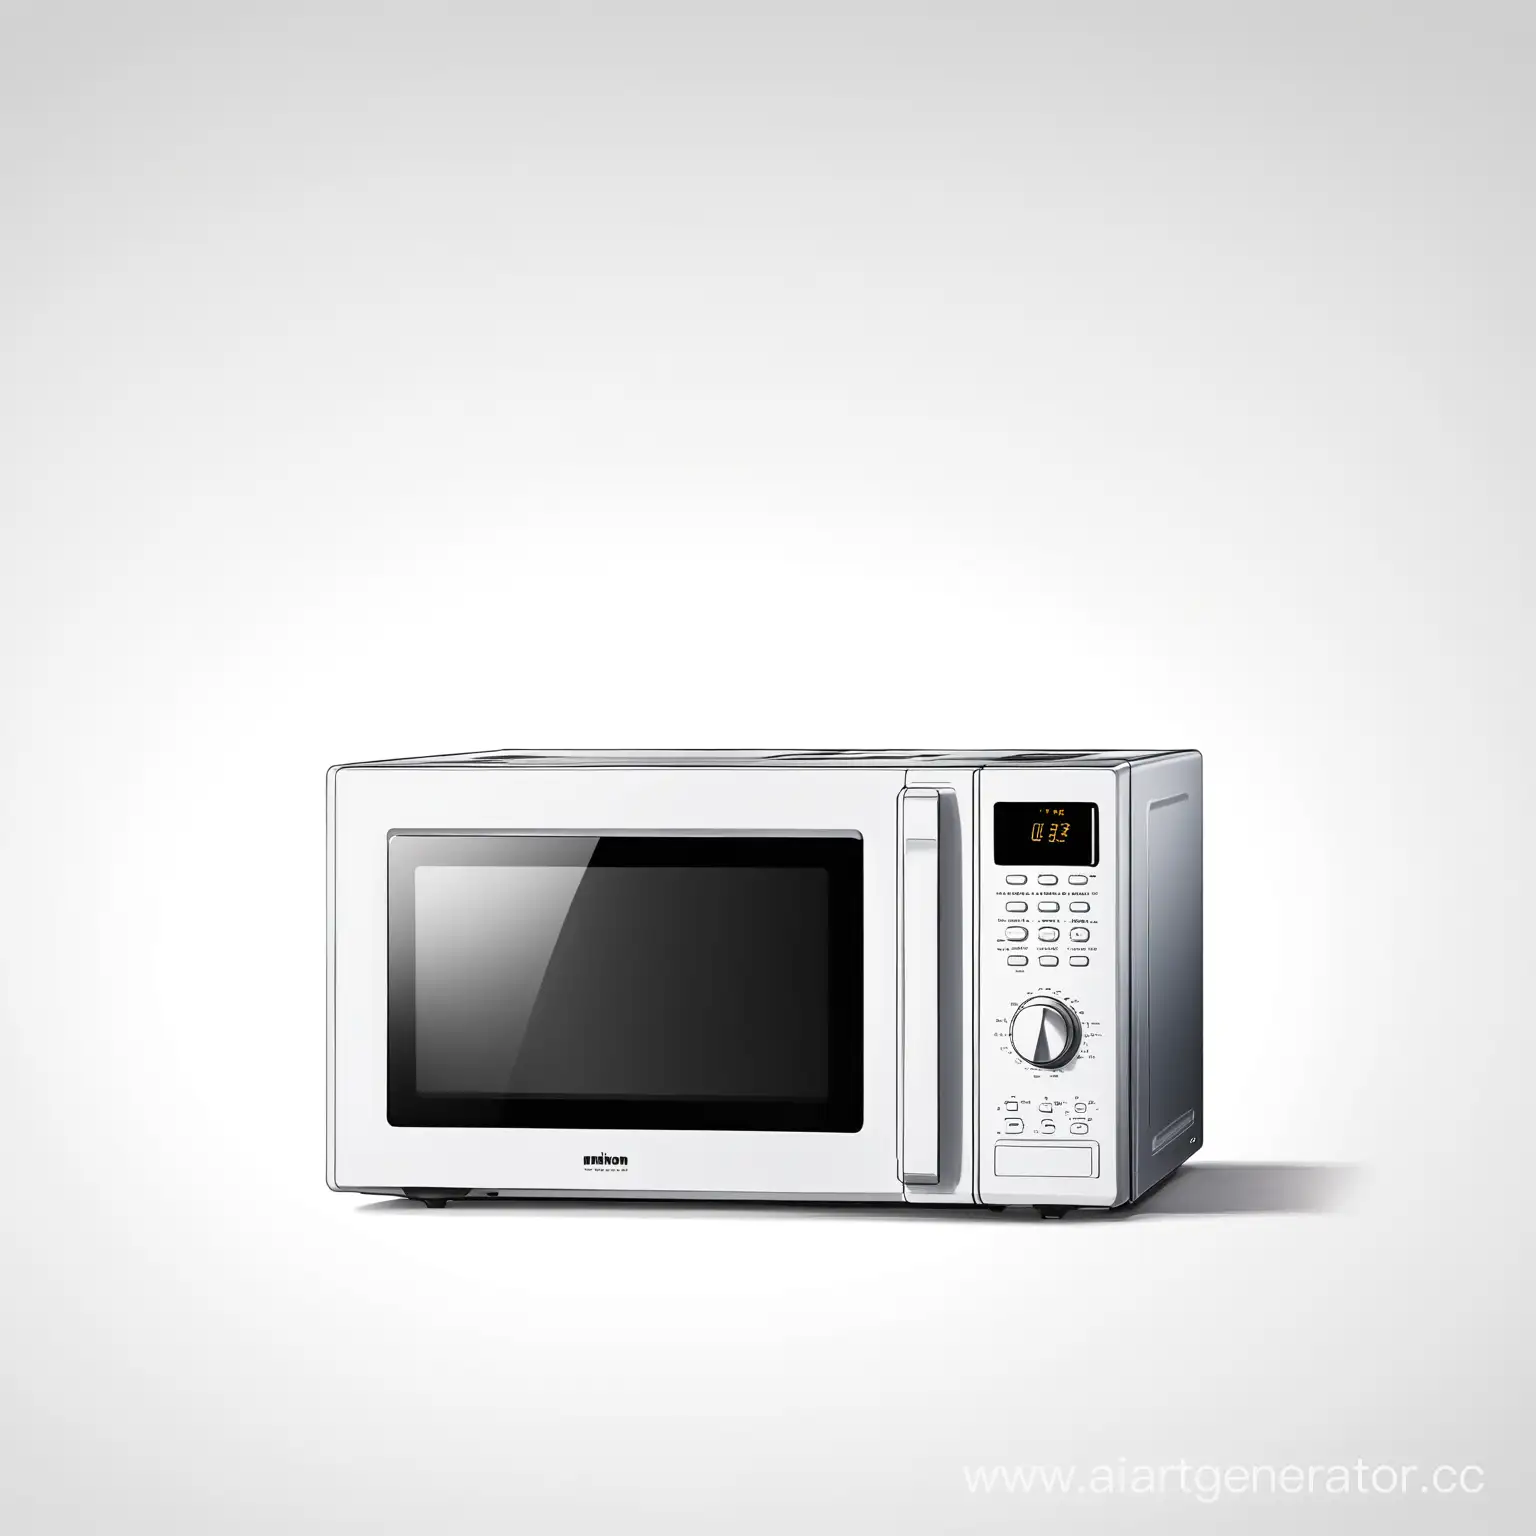 Microwave-Oven-on-Clean-White-Background